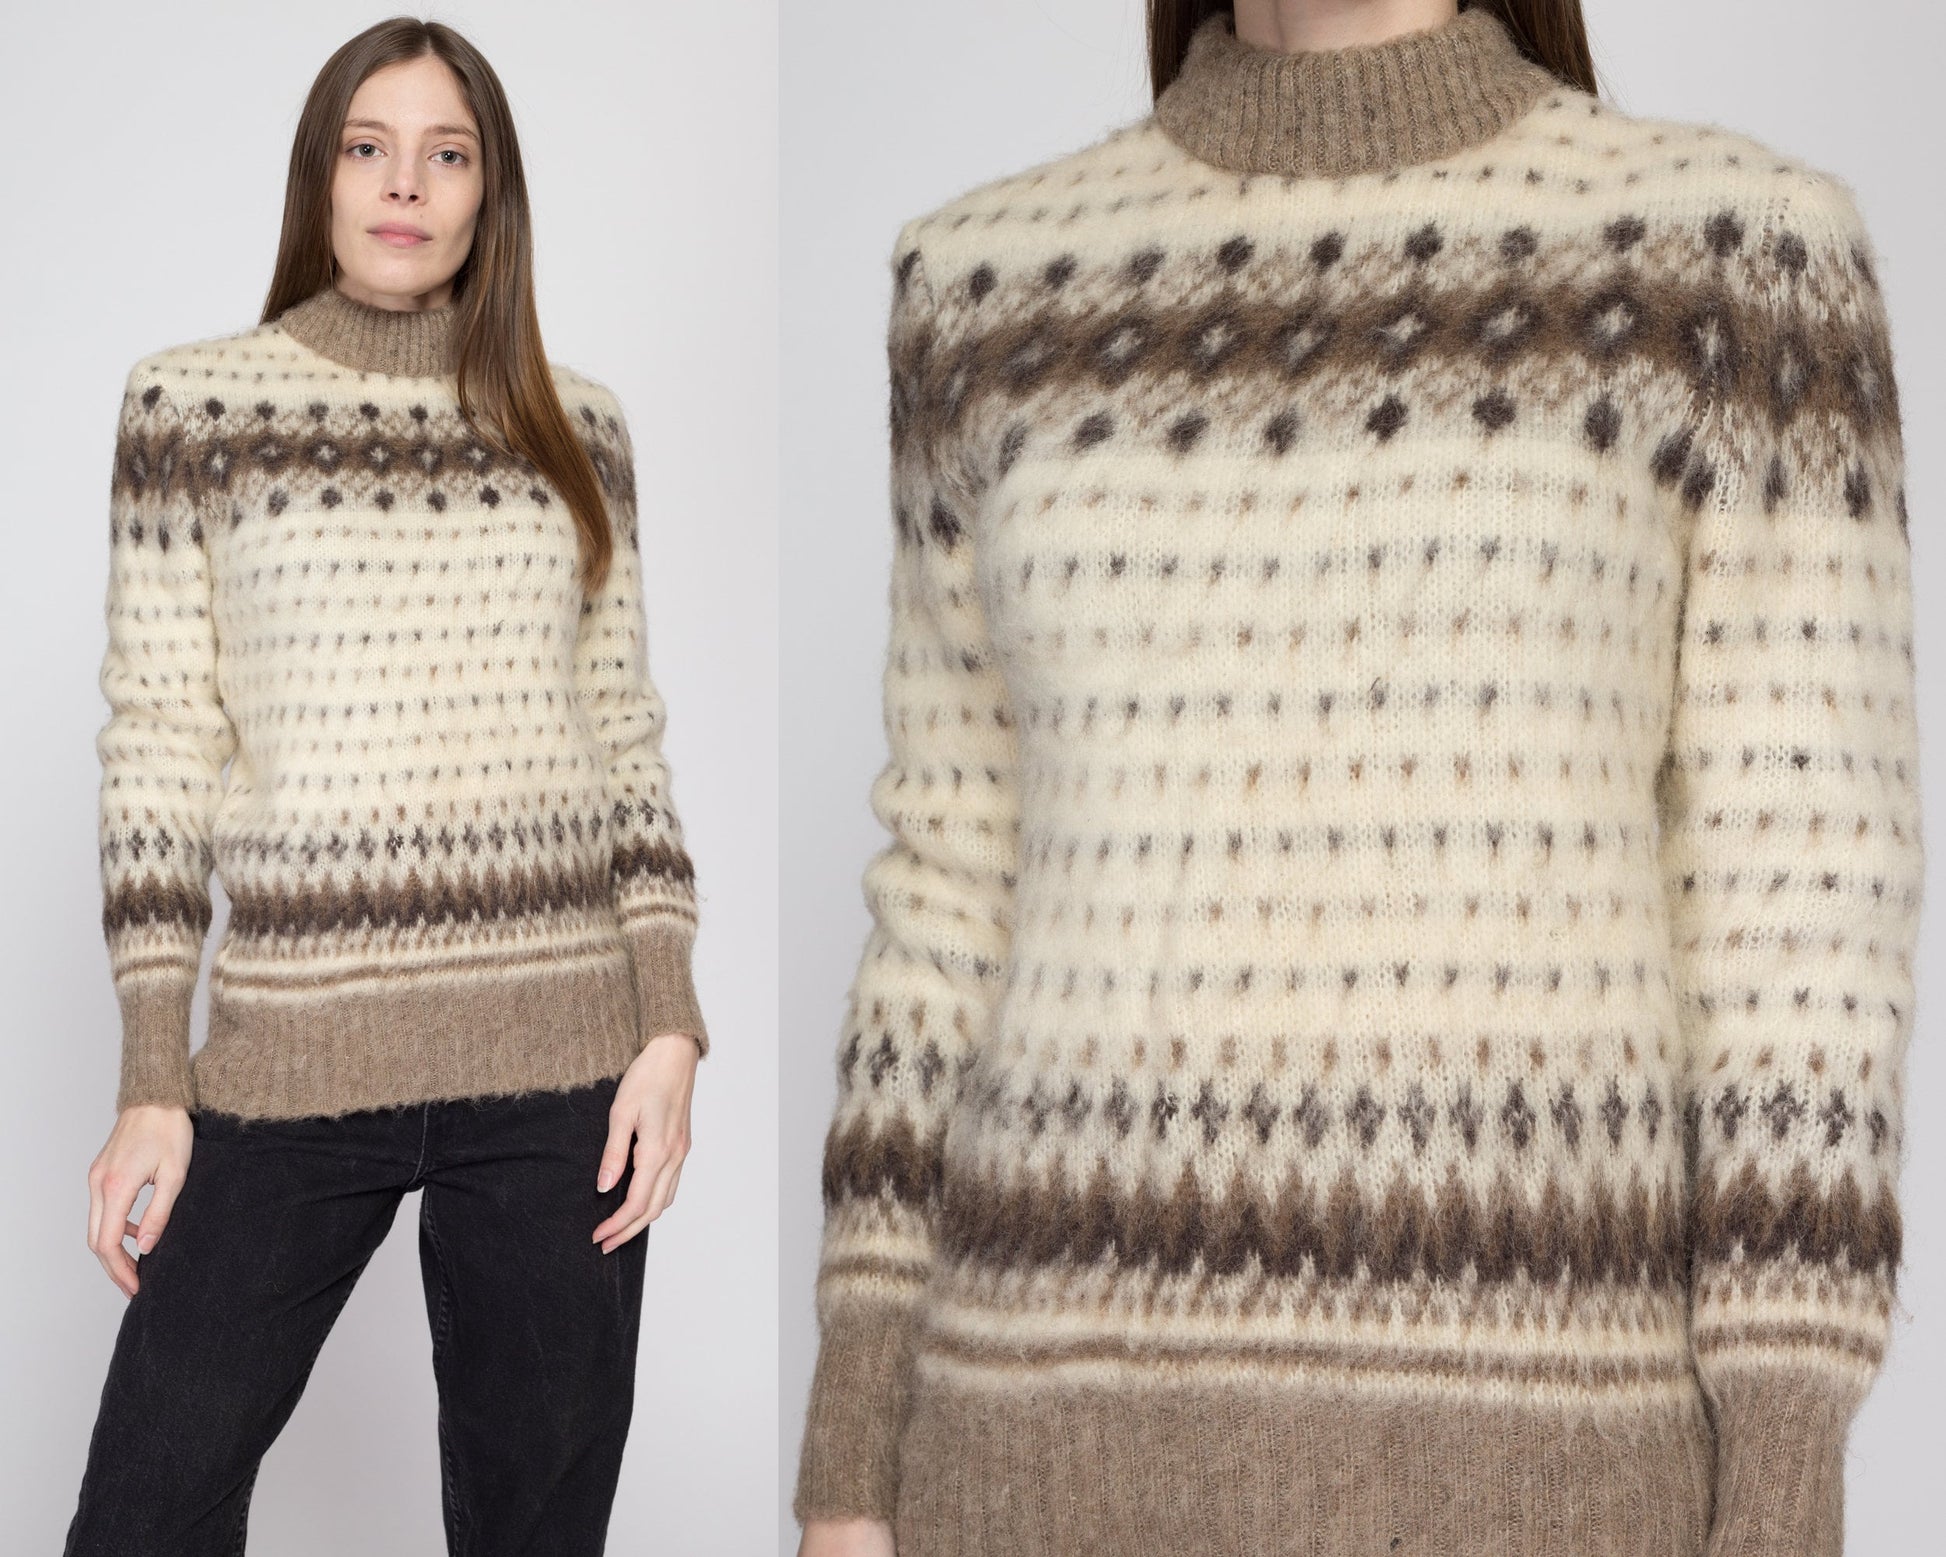 XS-Sm 70s Icelandic Fair Isle Sweater | Vintage Nordic Lopi Lopapeysa Hand Knit Wool Pullover Jumper